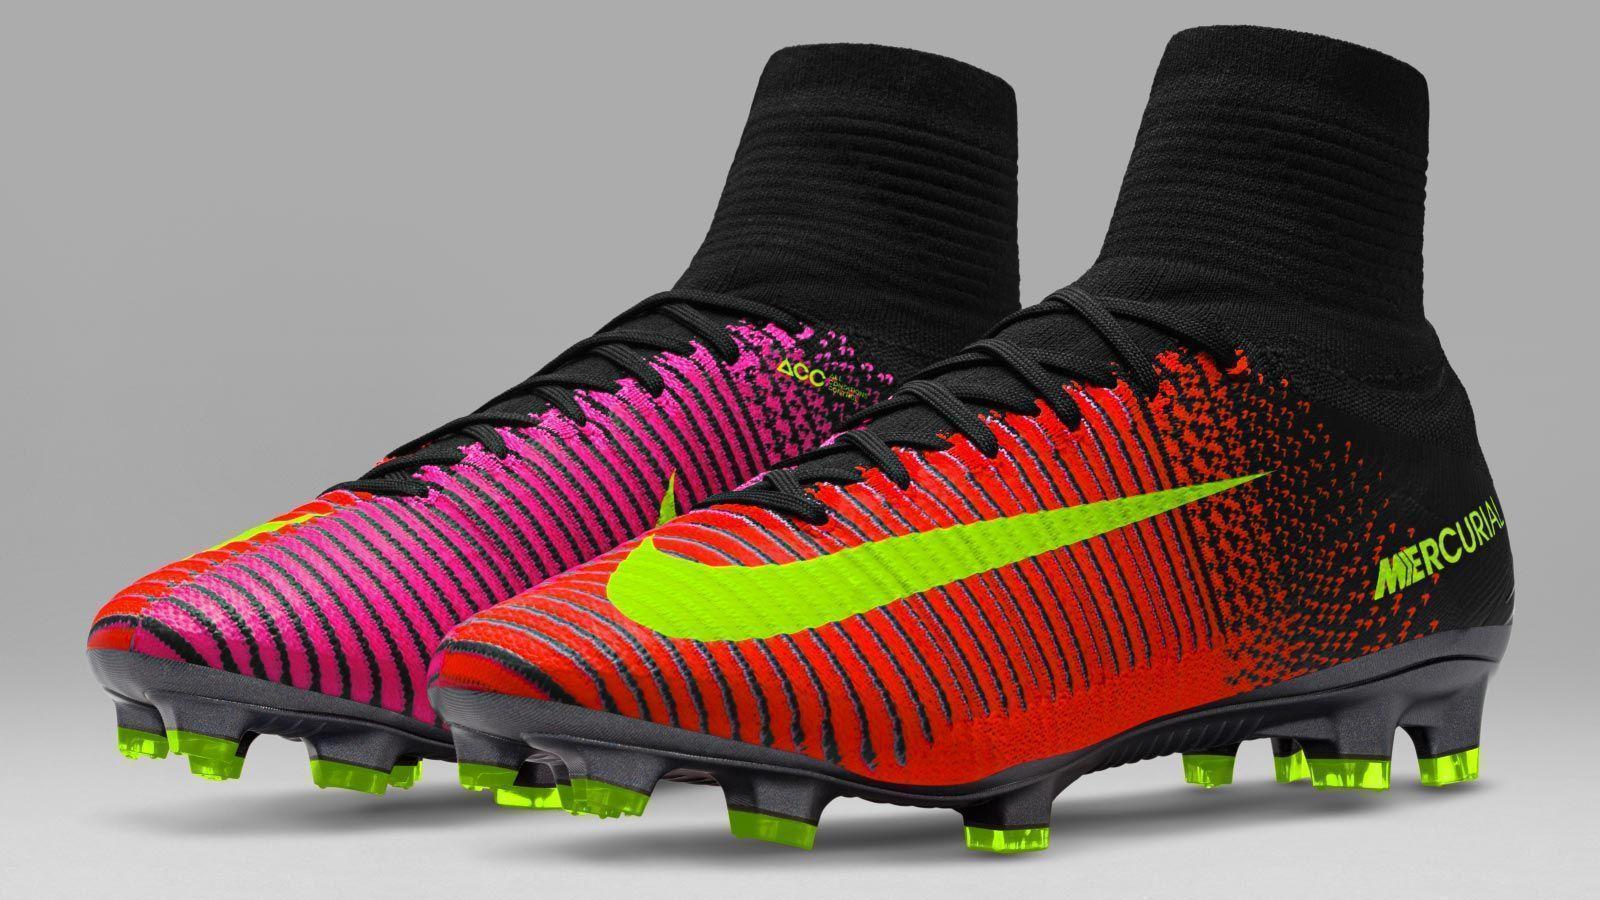 Next Gen Nike Mercurial Superfly Euro 2016 Boots Released